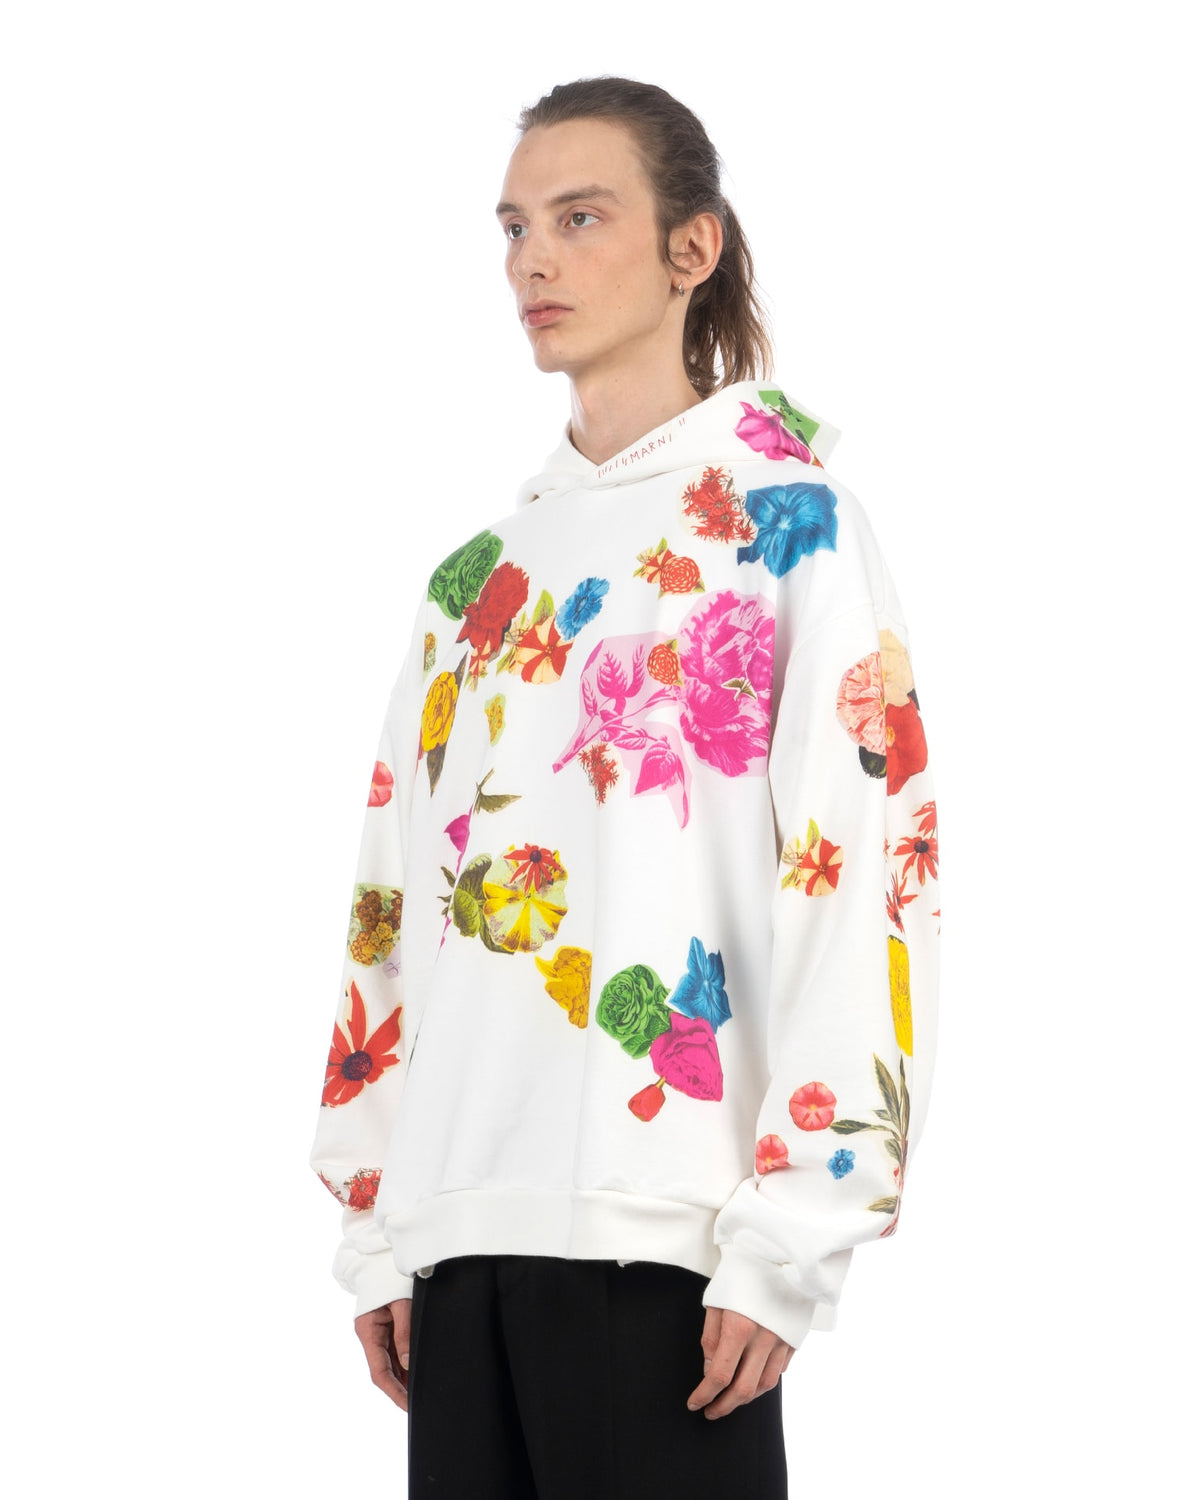 Marni | Collage Flower Hoodie Natural White - Concrete